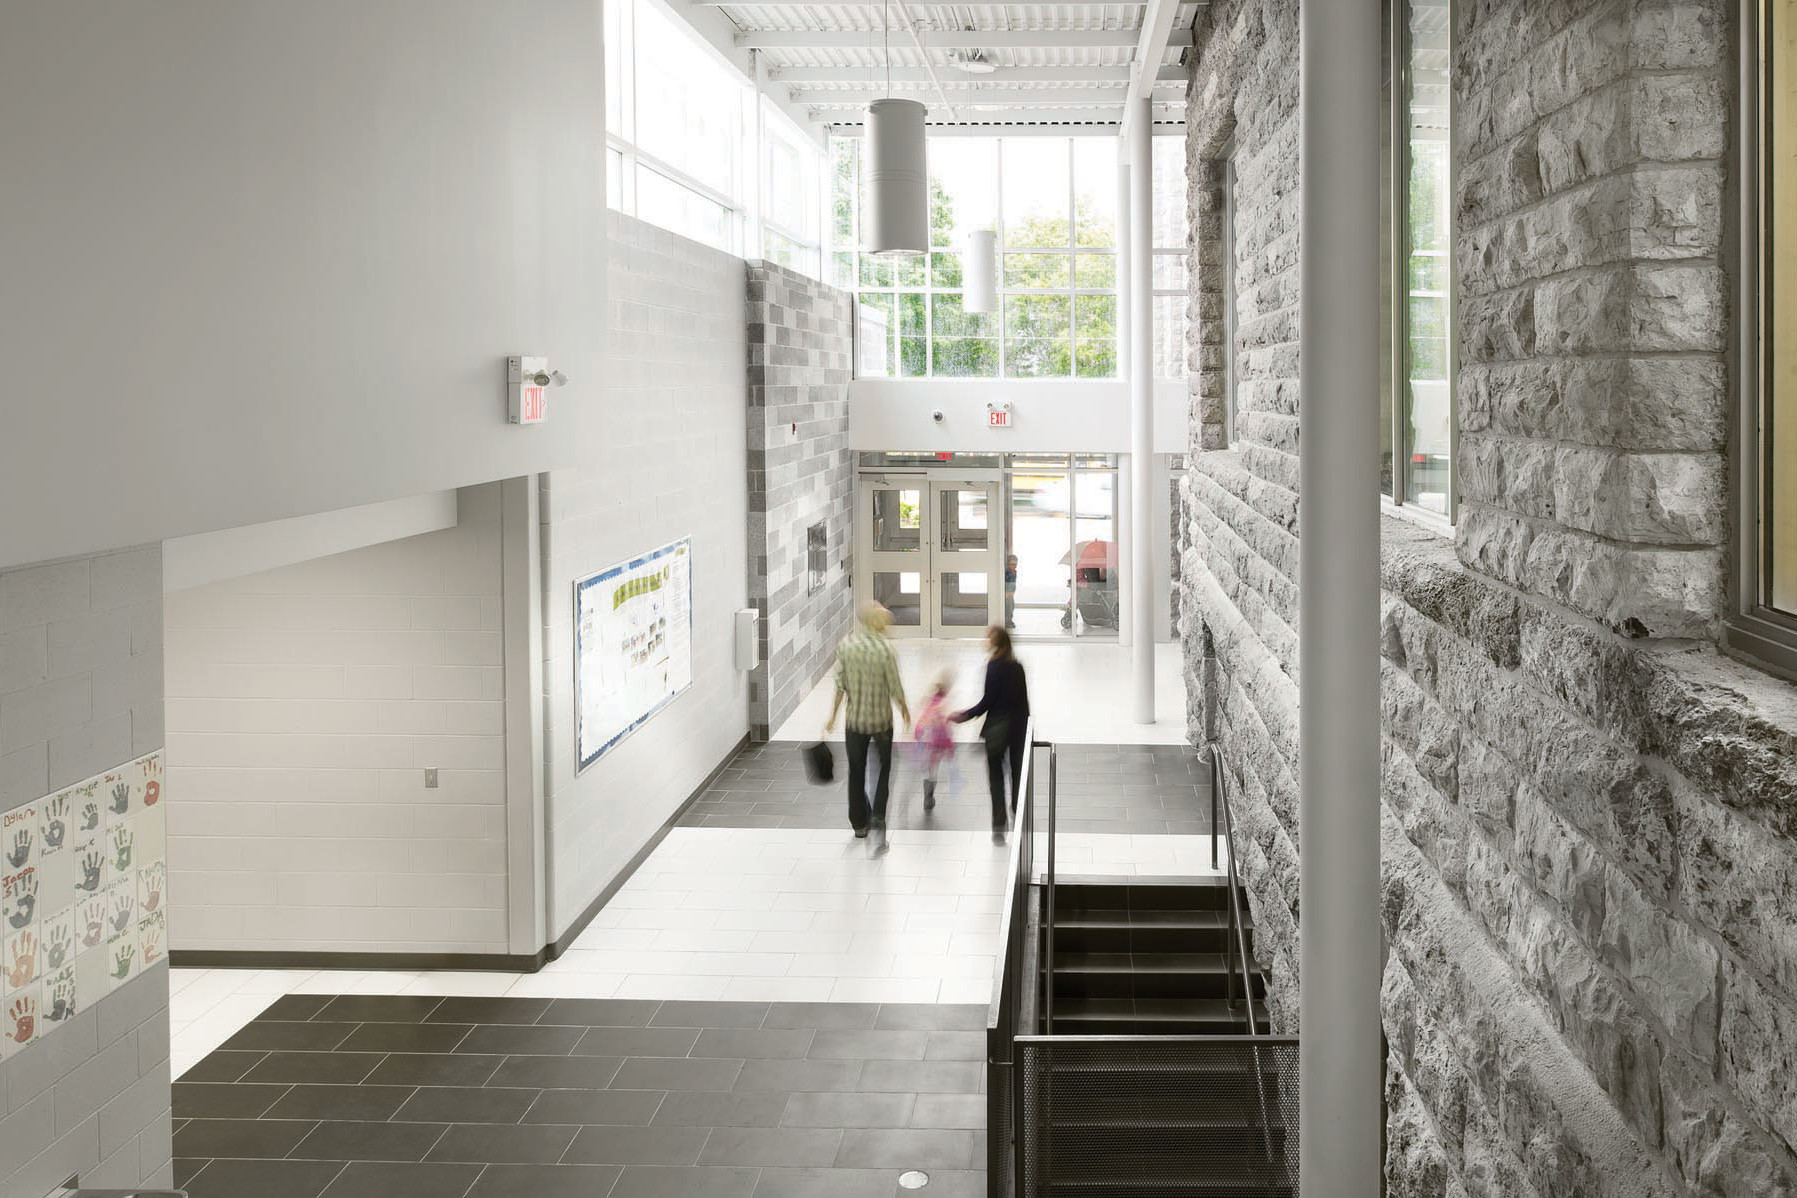 Double height entrance corridor showing connection between original stone façade and addition with clerestory windows